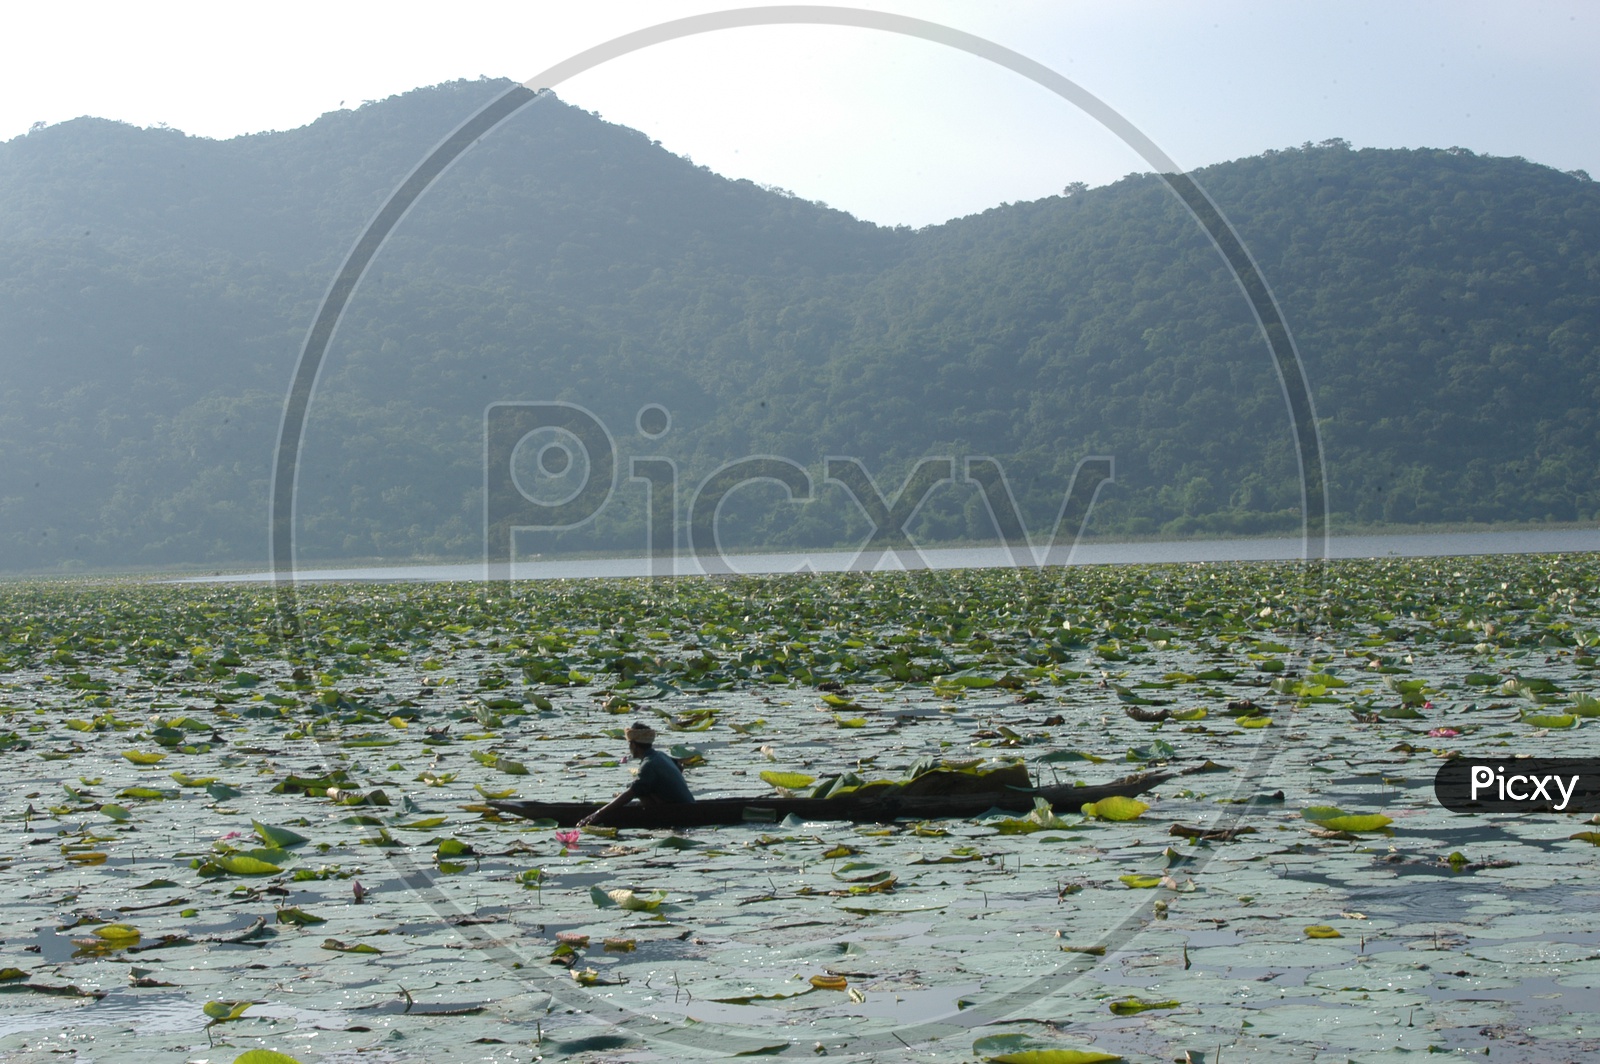 A tribal Man on a Boat in a Lotus lake